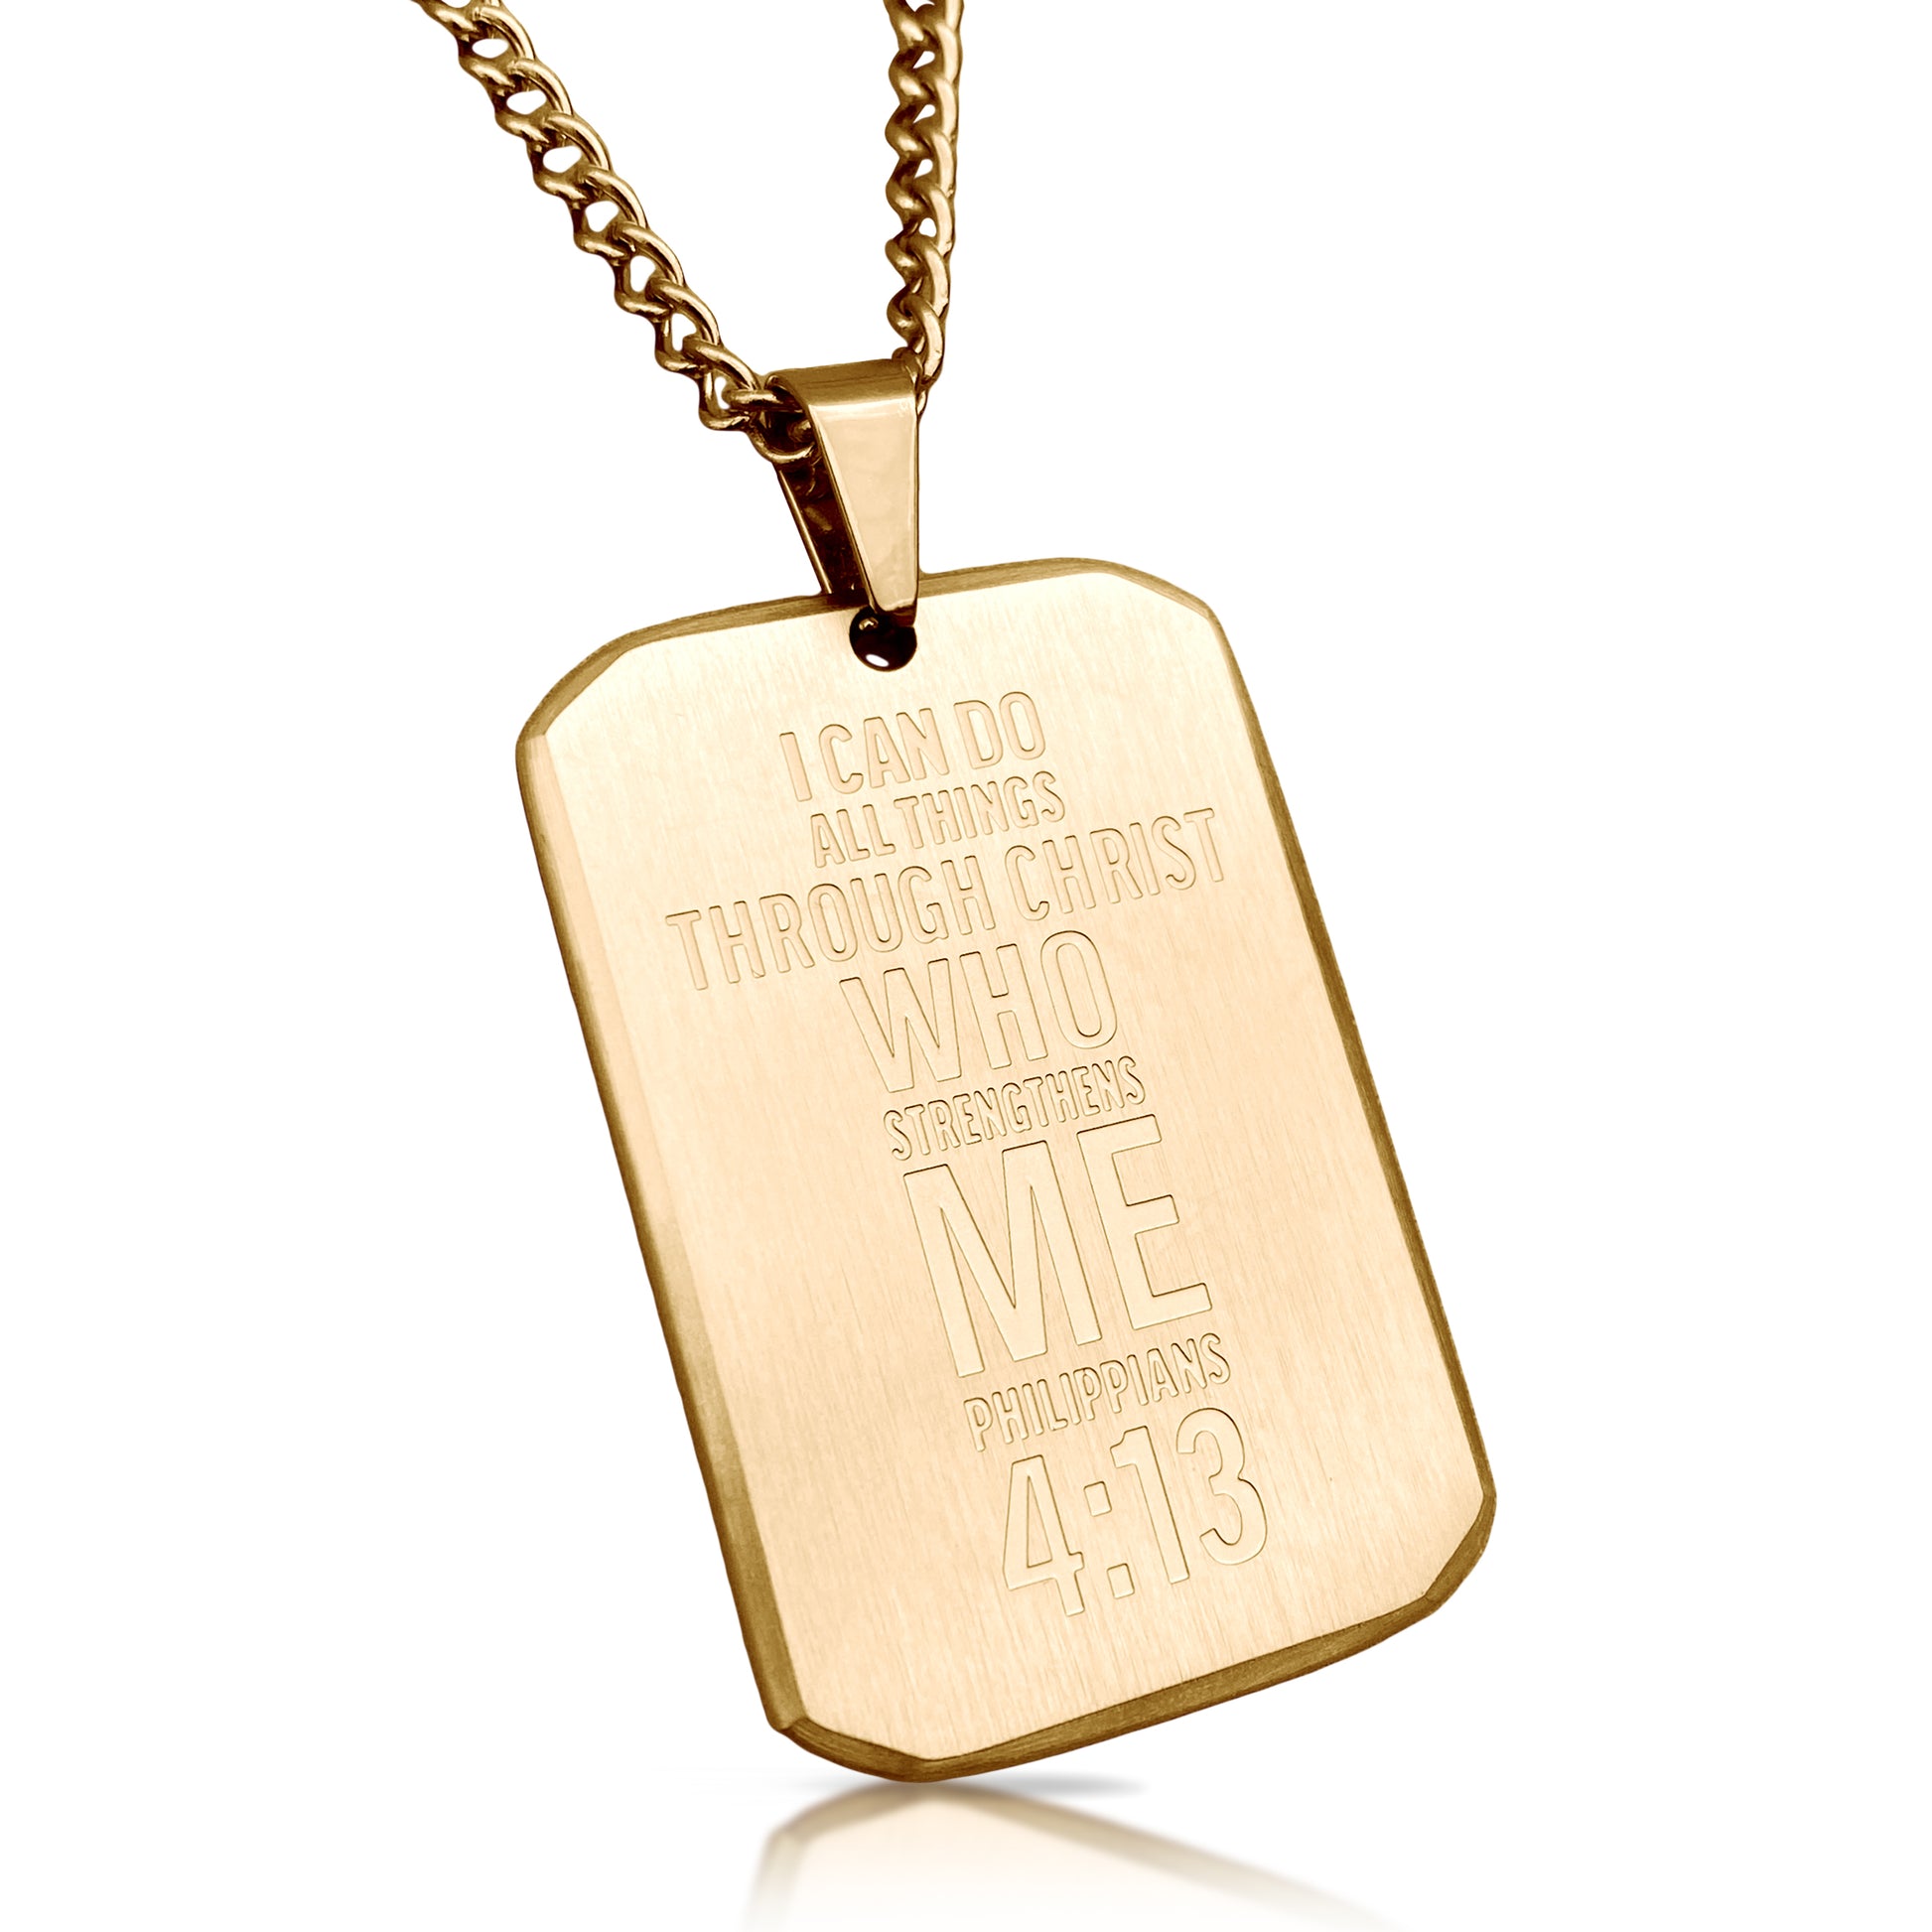 Philippians 4:13 Pendant With Chain Necklace - 14K Gold Plated Stainless Steel